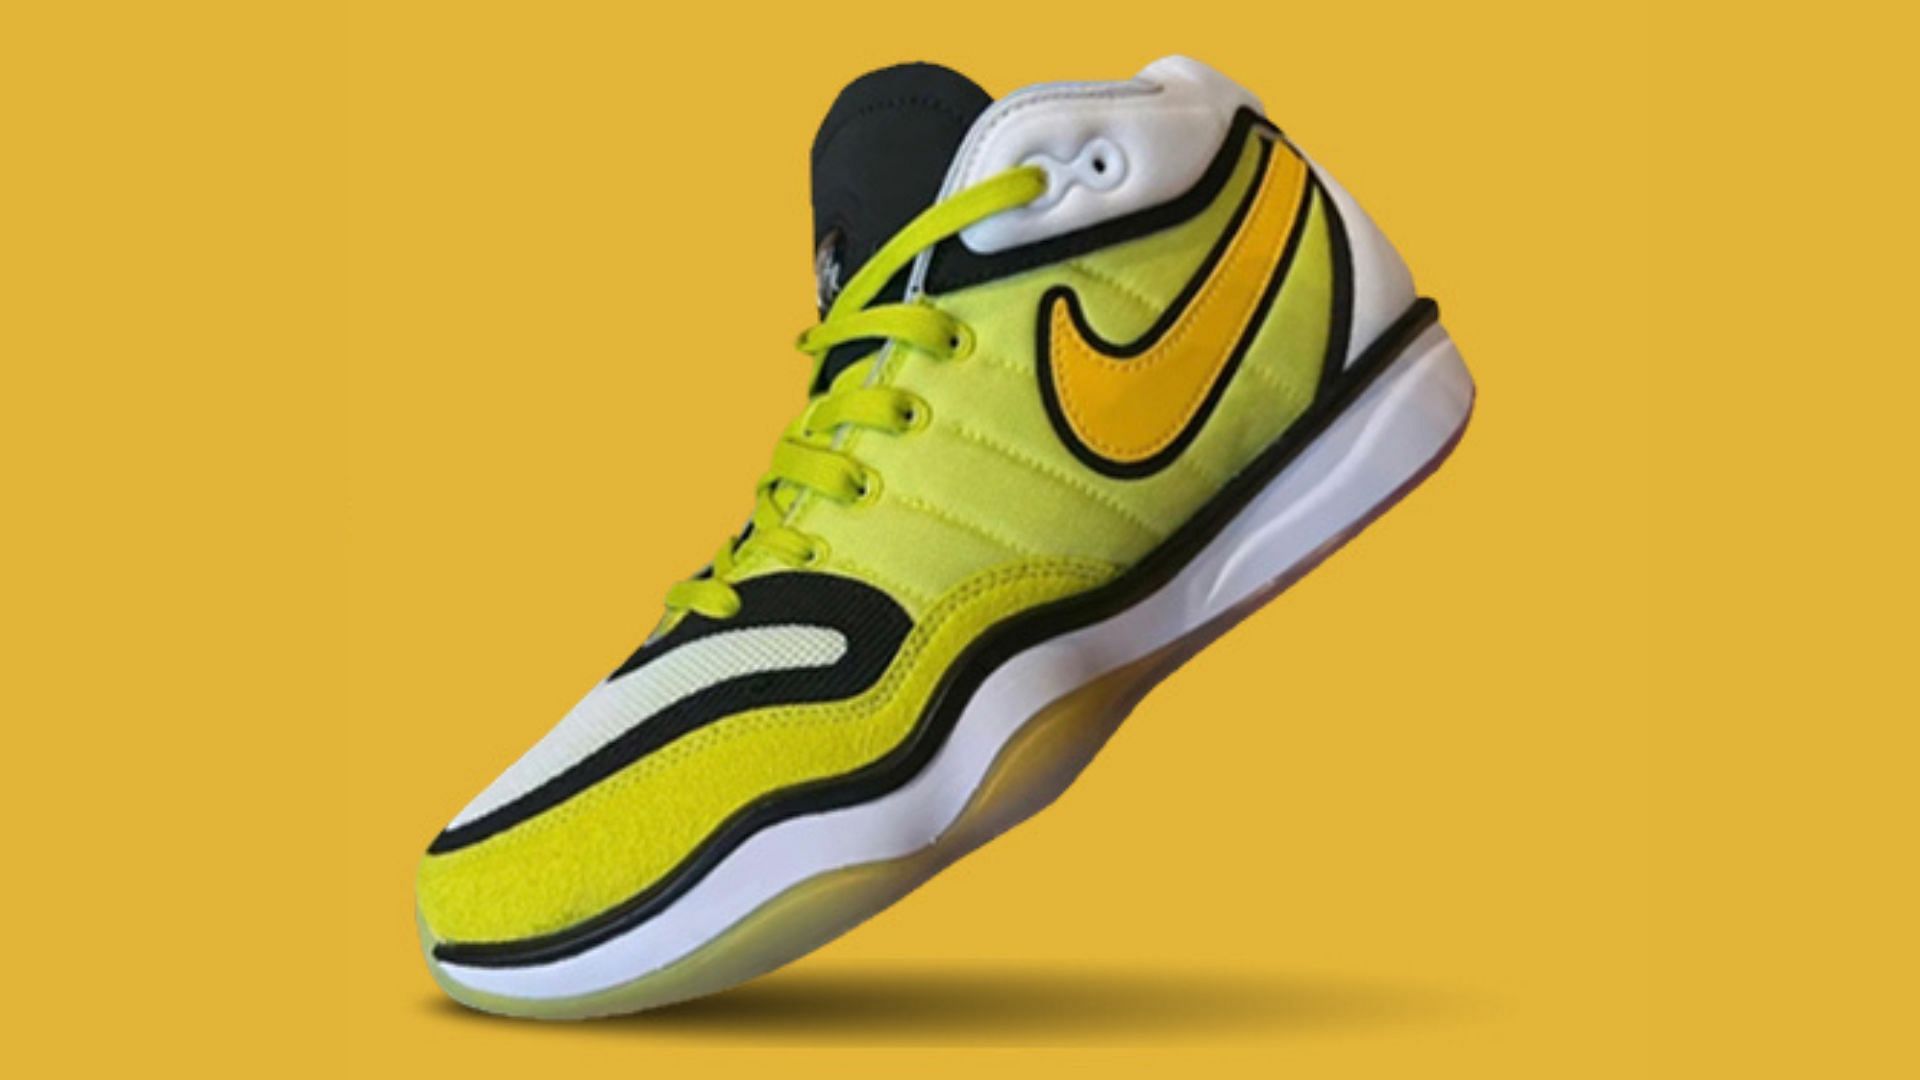 Nike: Nike Air Zoom GT Hustle 2 “Talaria” shoes: Where to get, price ...